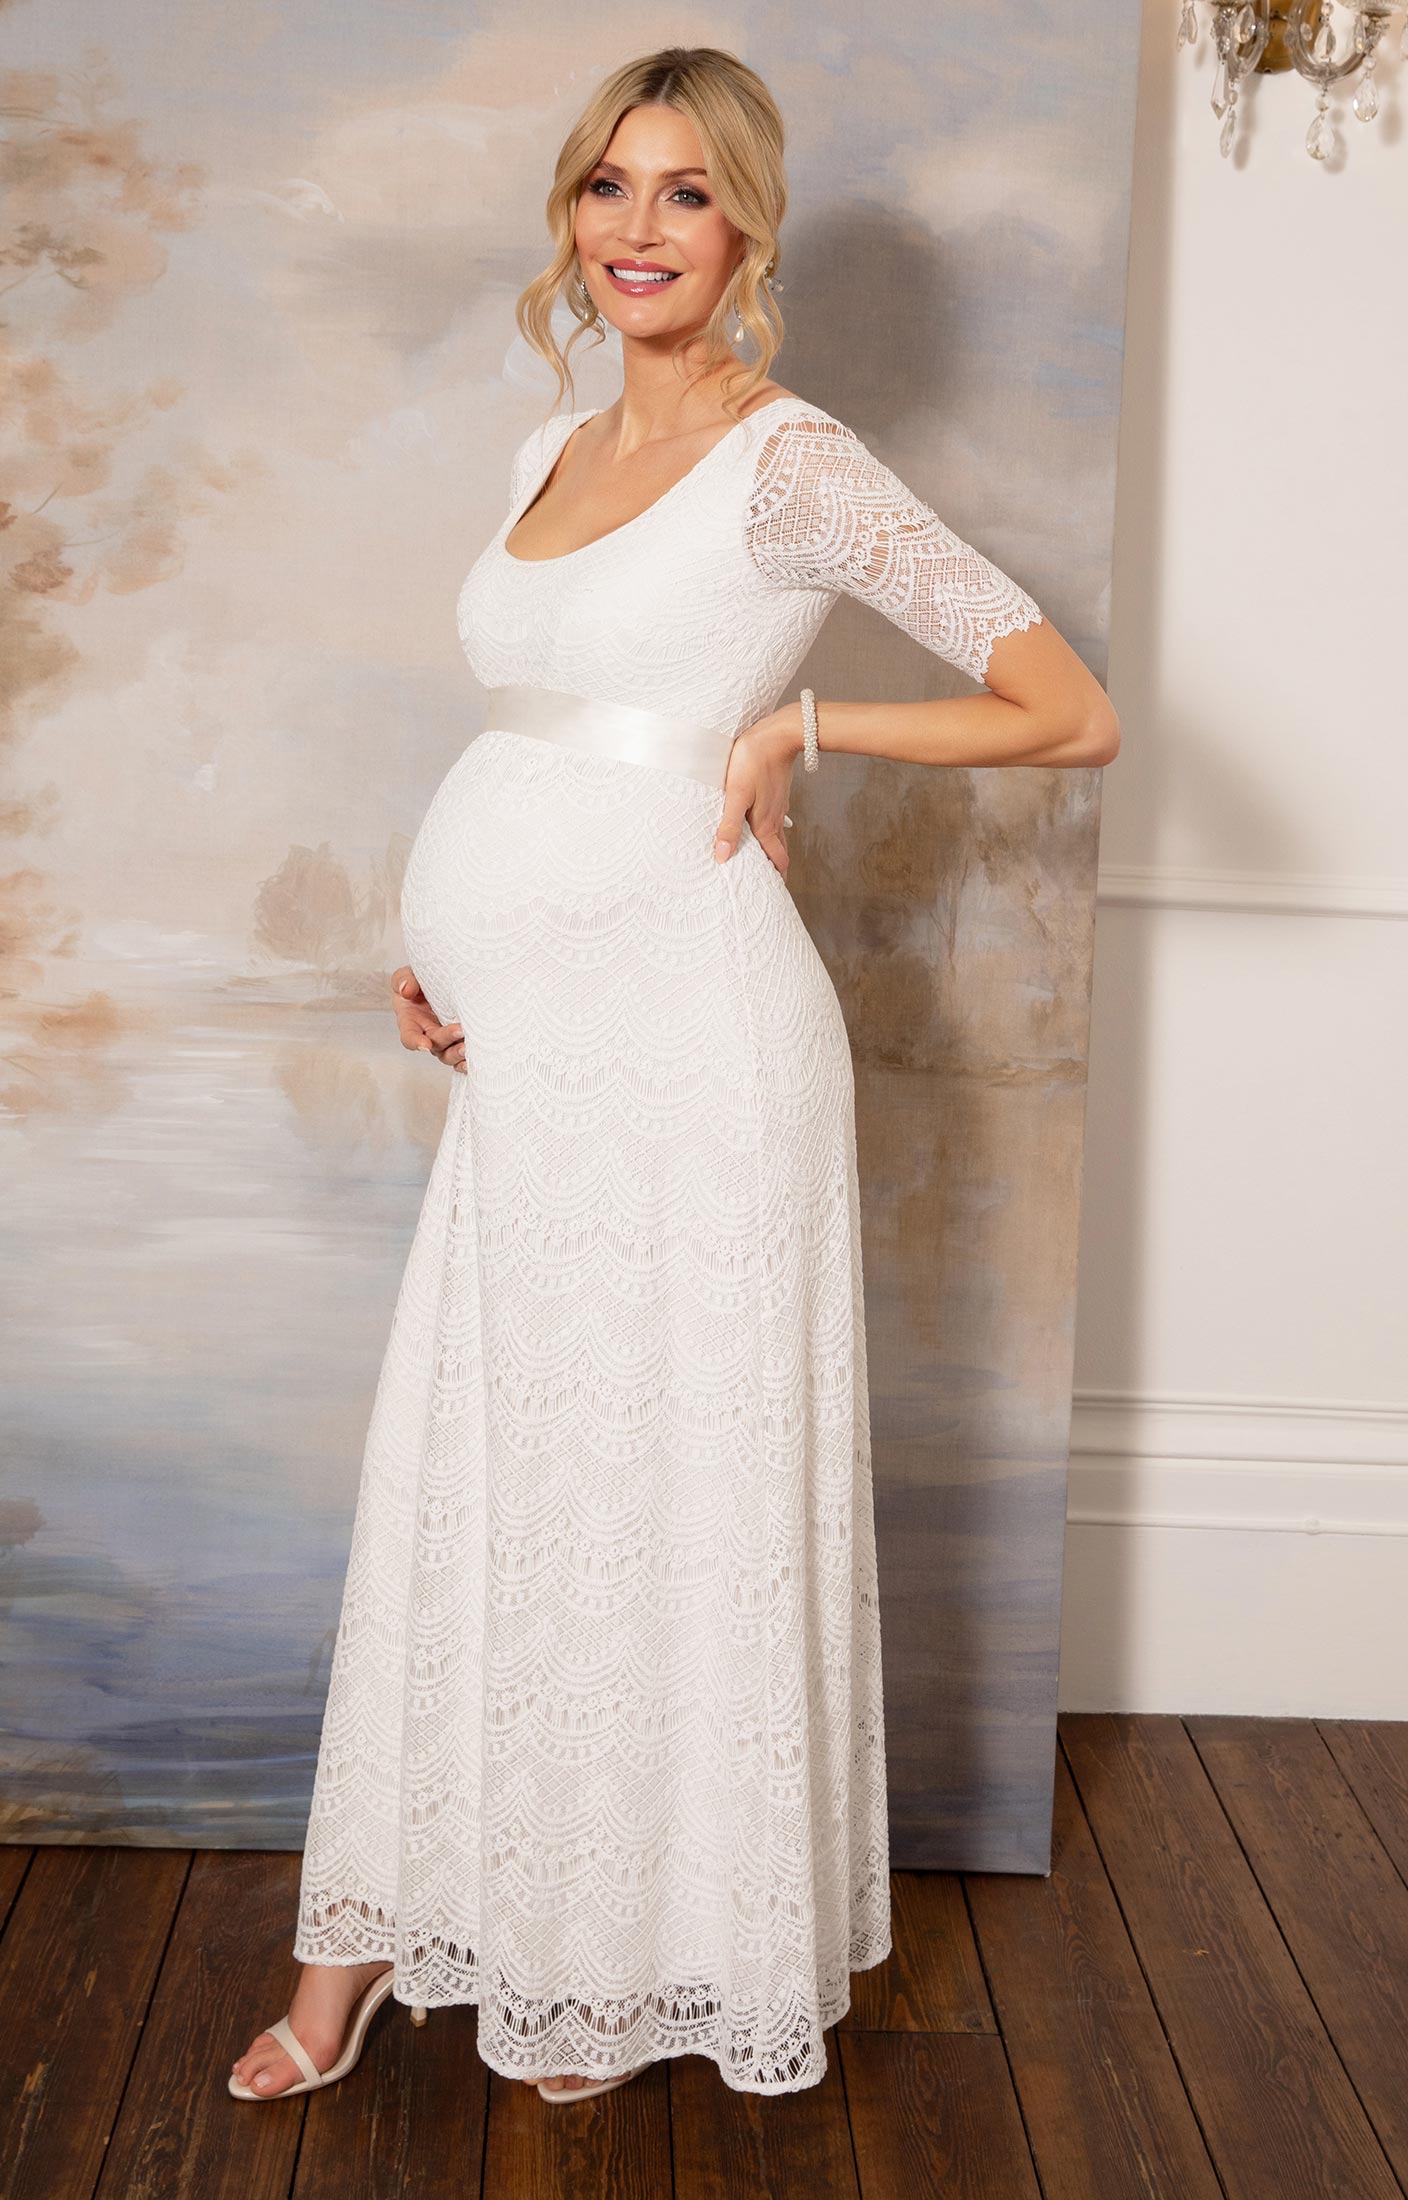 Civilize Fruit vegetables come Verona Maternity Wedding Gown Ivory White - Maternity Wedding Dresses,  Evening Wear and Party Clothes by Tiffany Rose UK